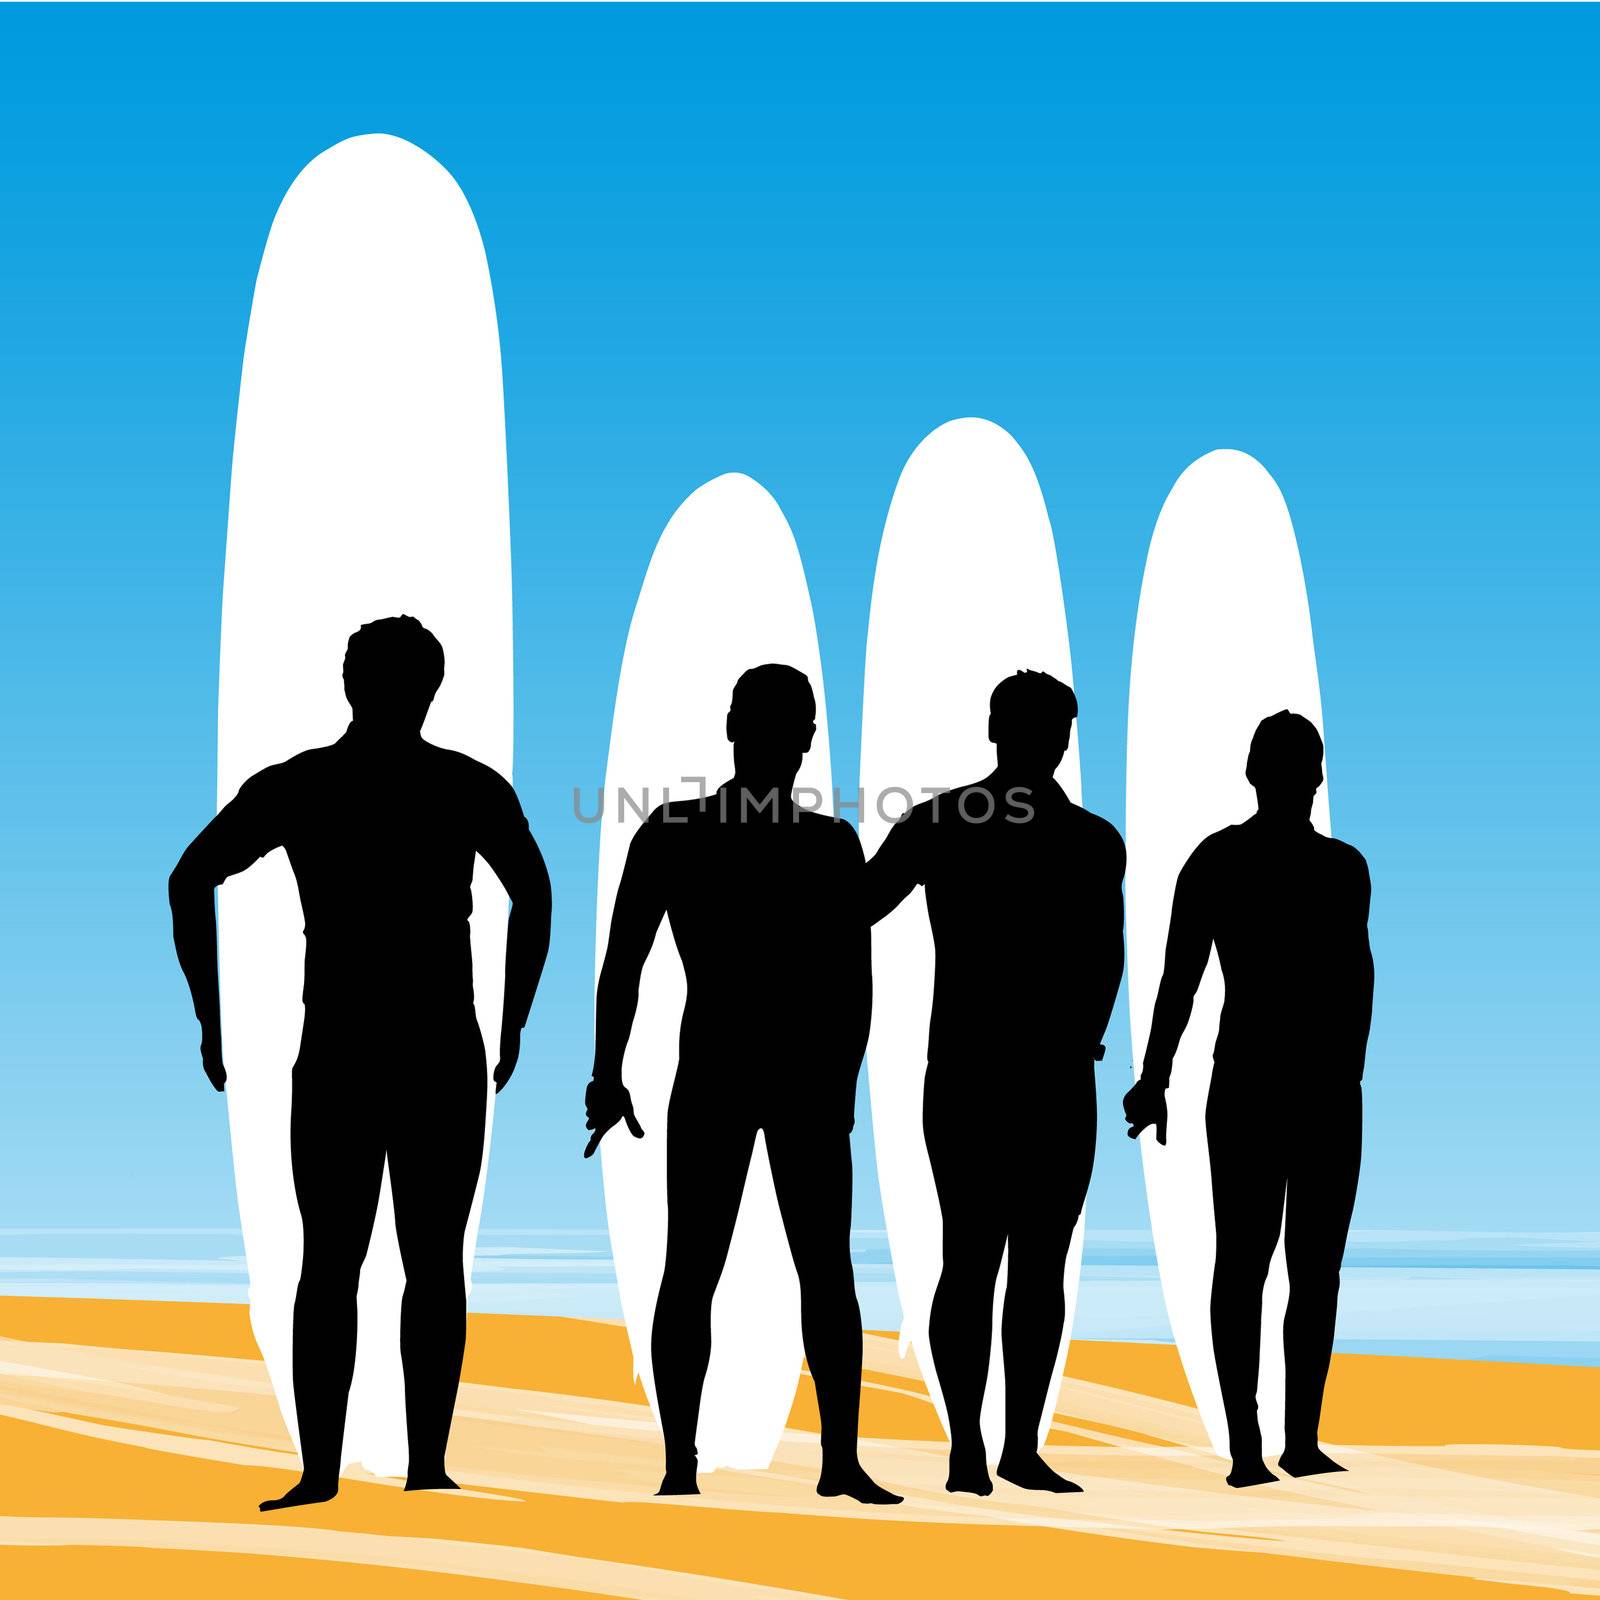 Surfers with surfboards posing for the picture on a beach background.